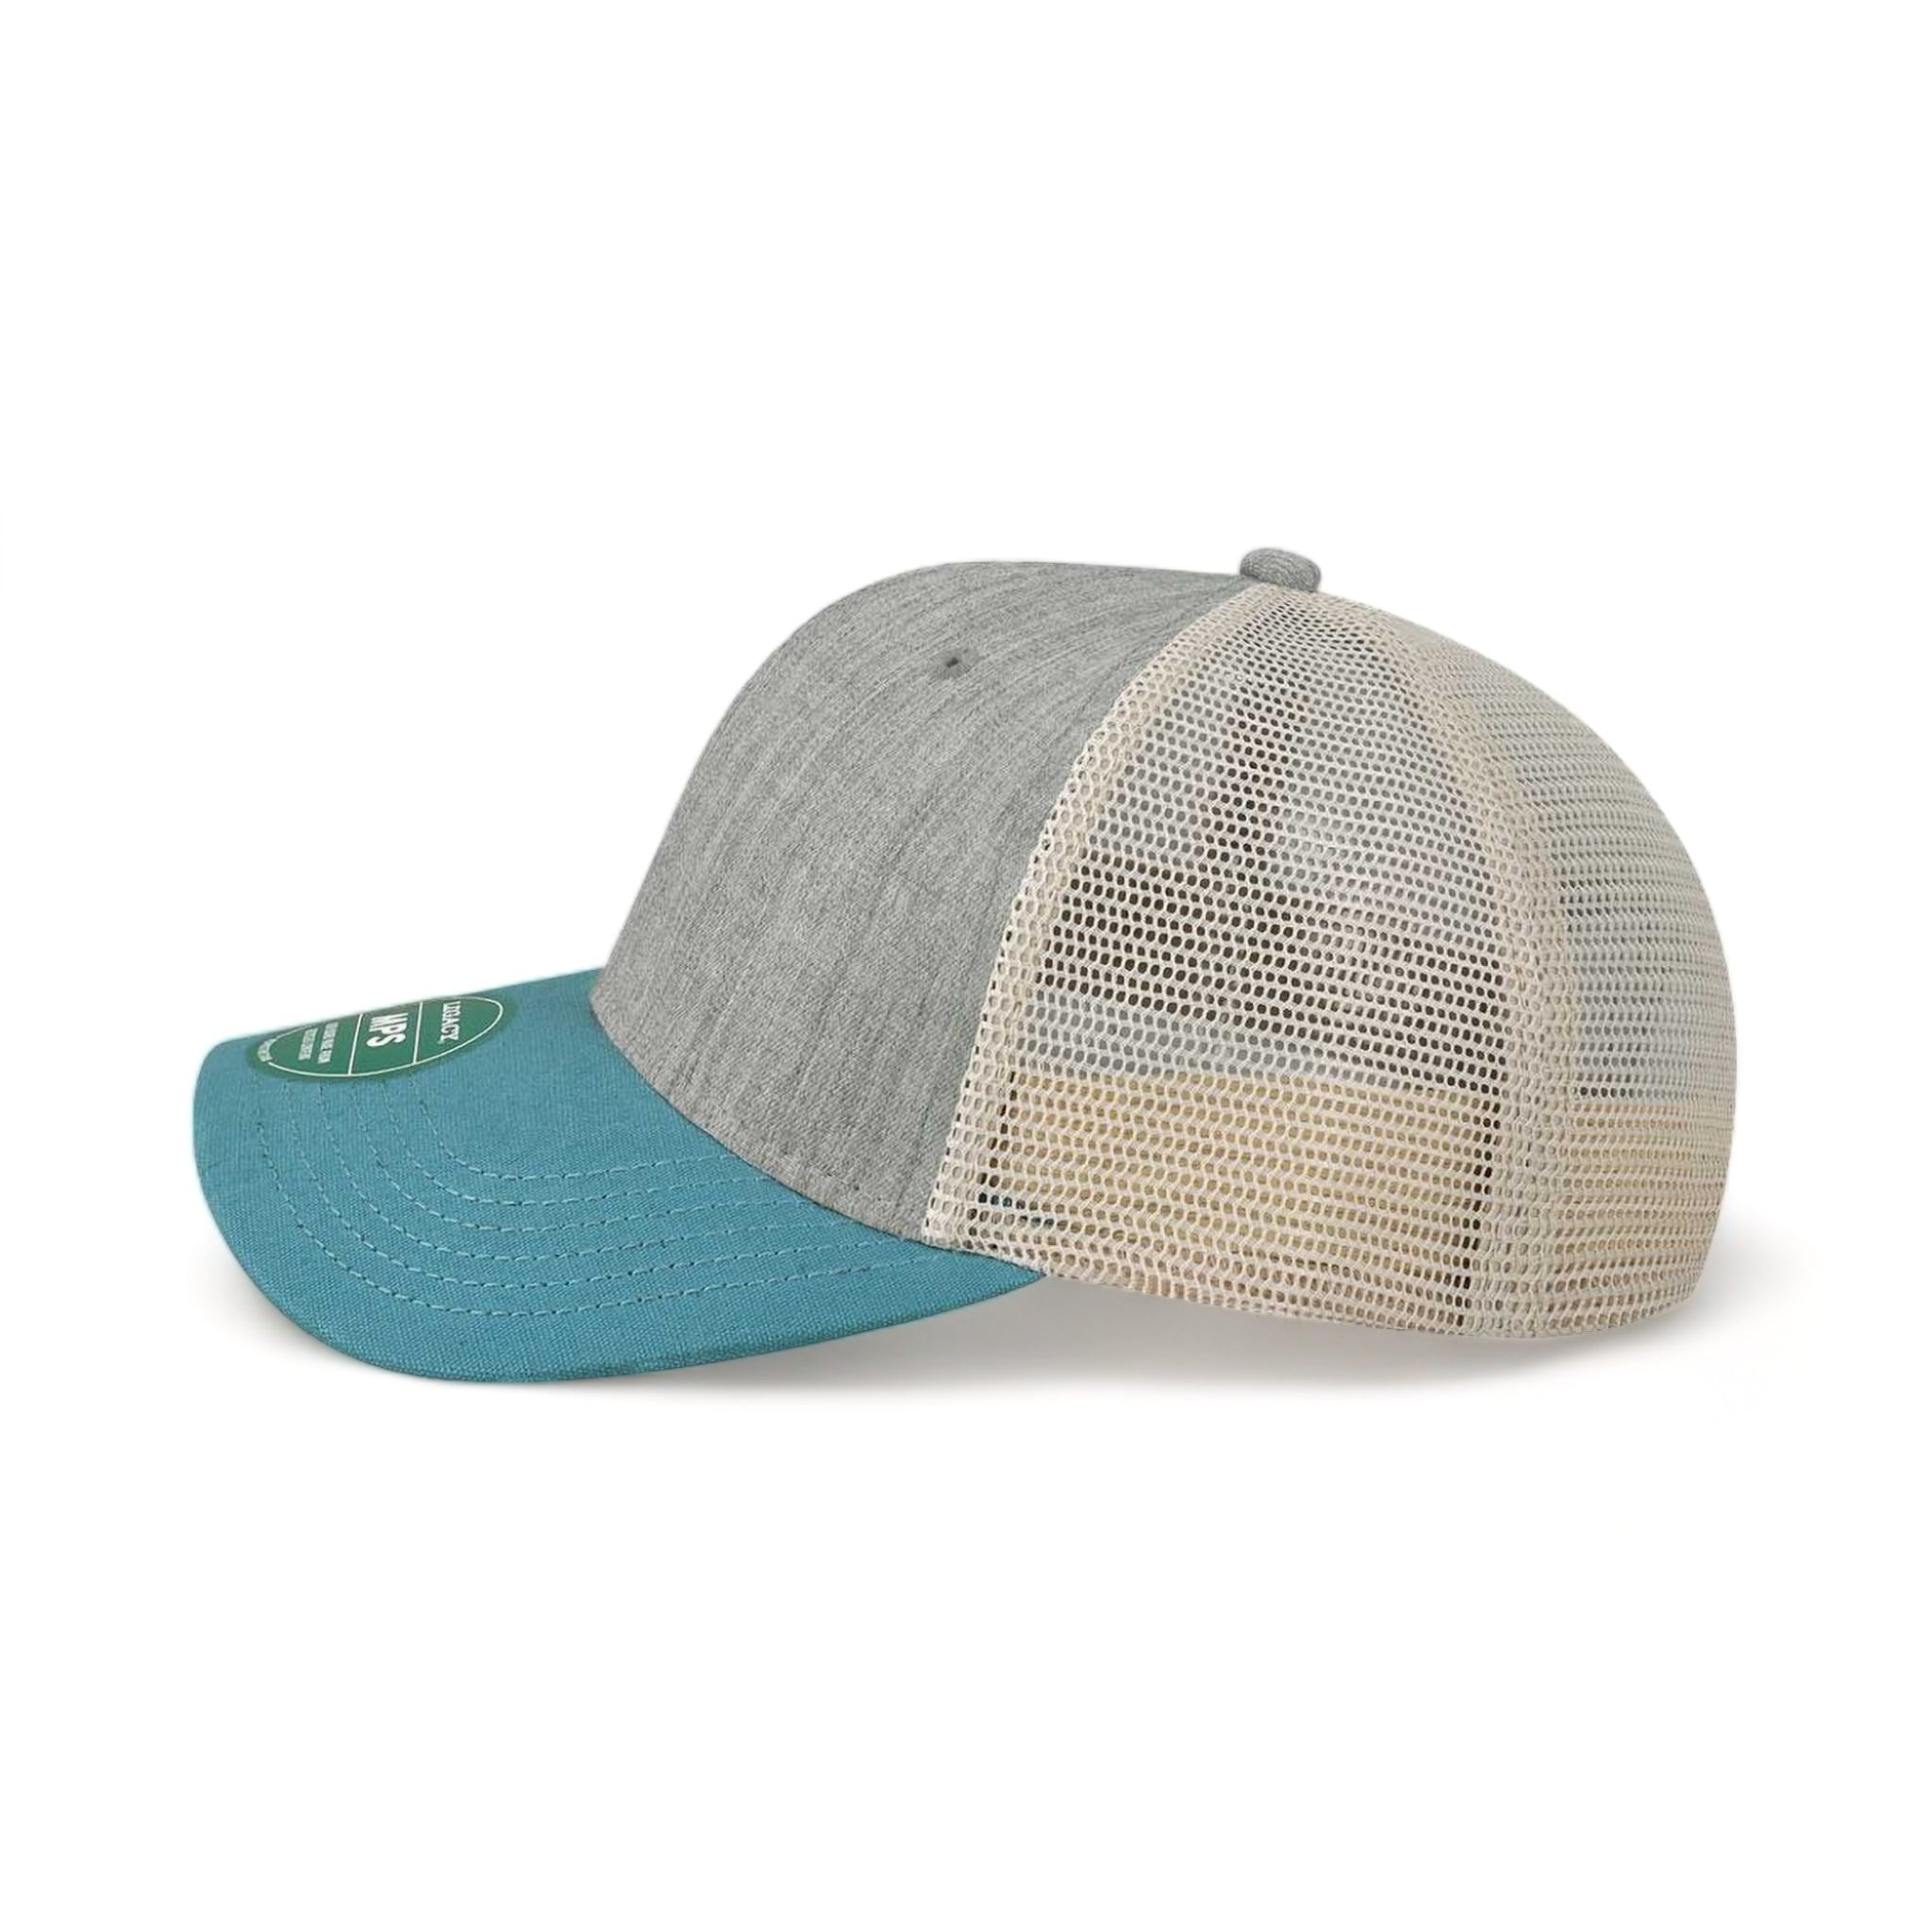 Side view of LEGACY MPS custom hat in mélange grey, pacific blue and stone